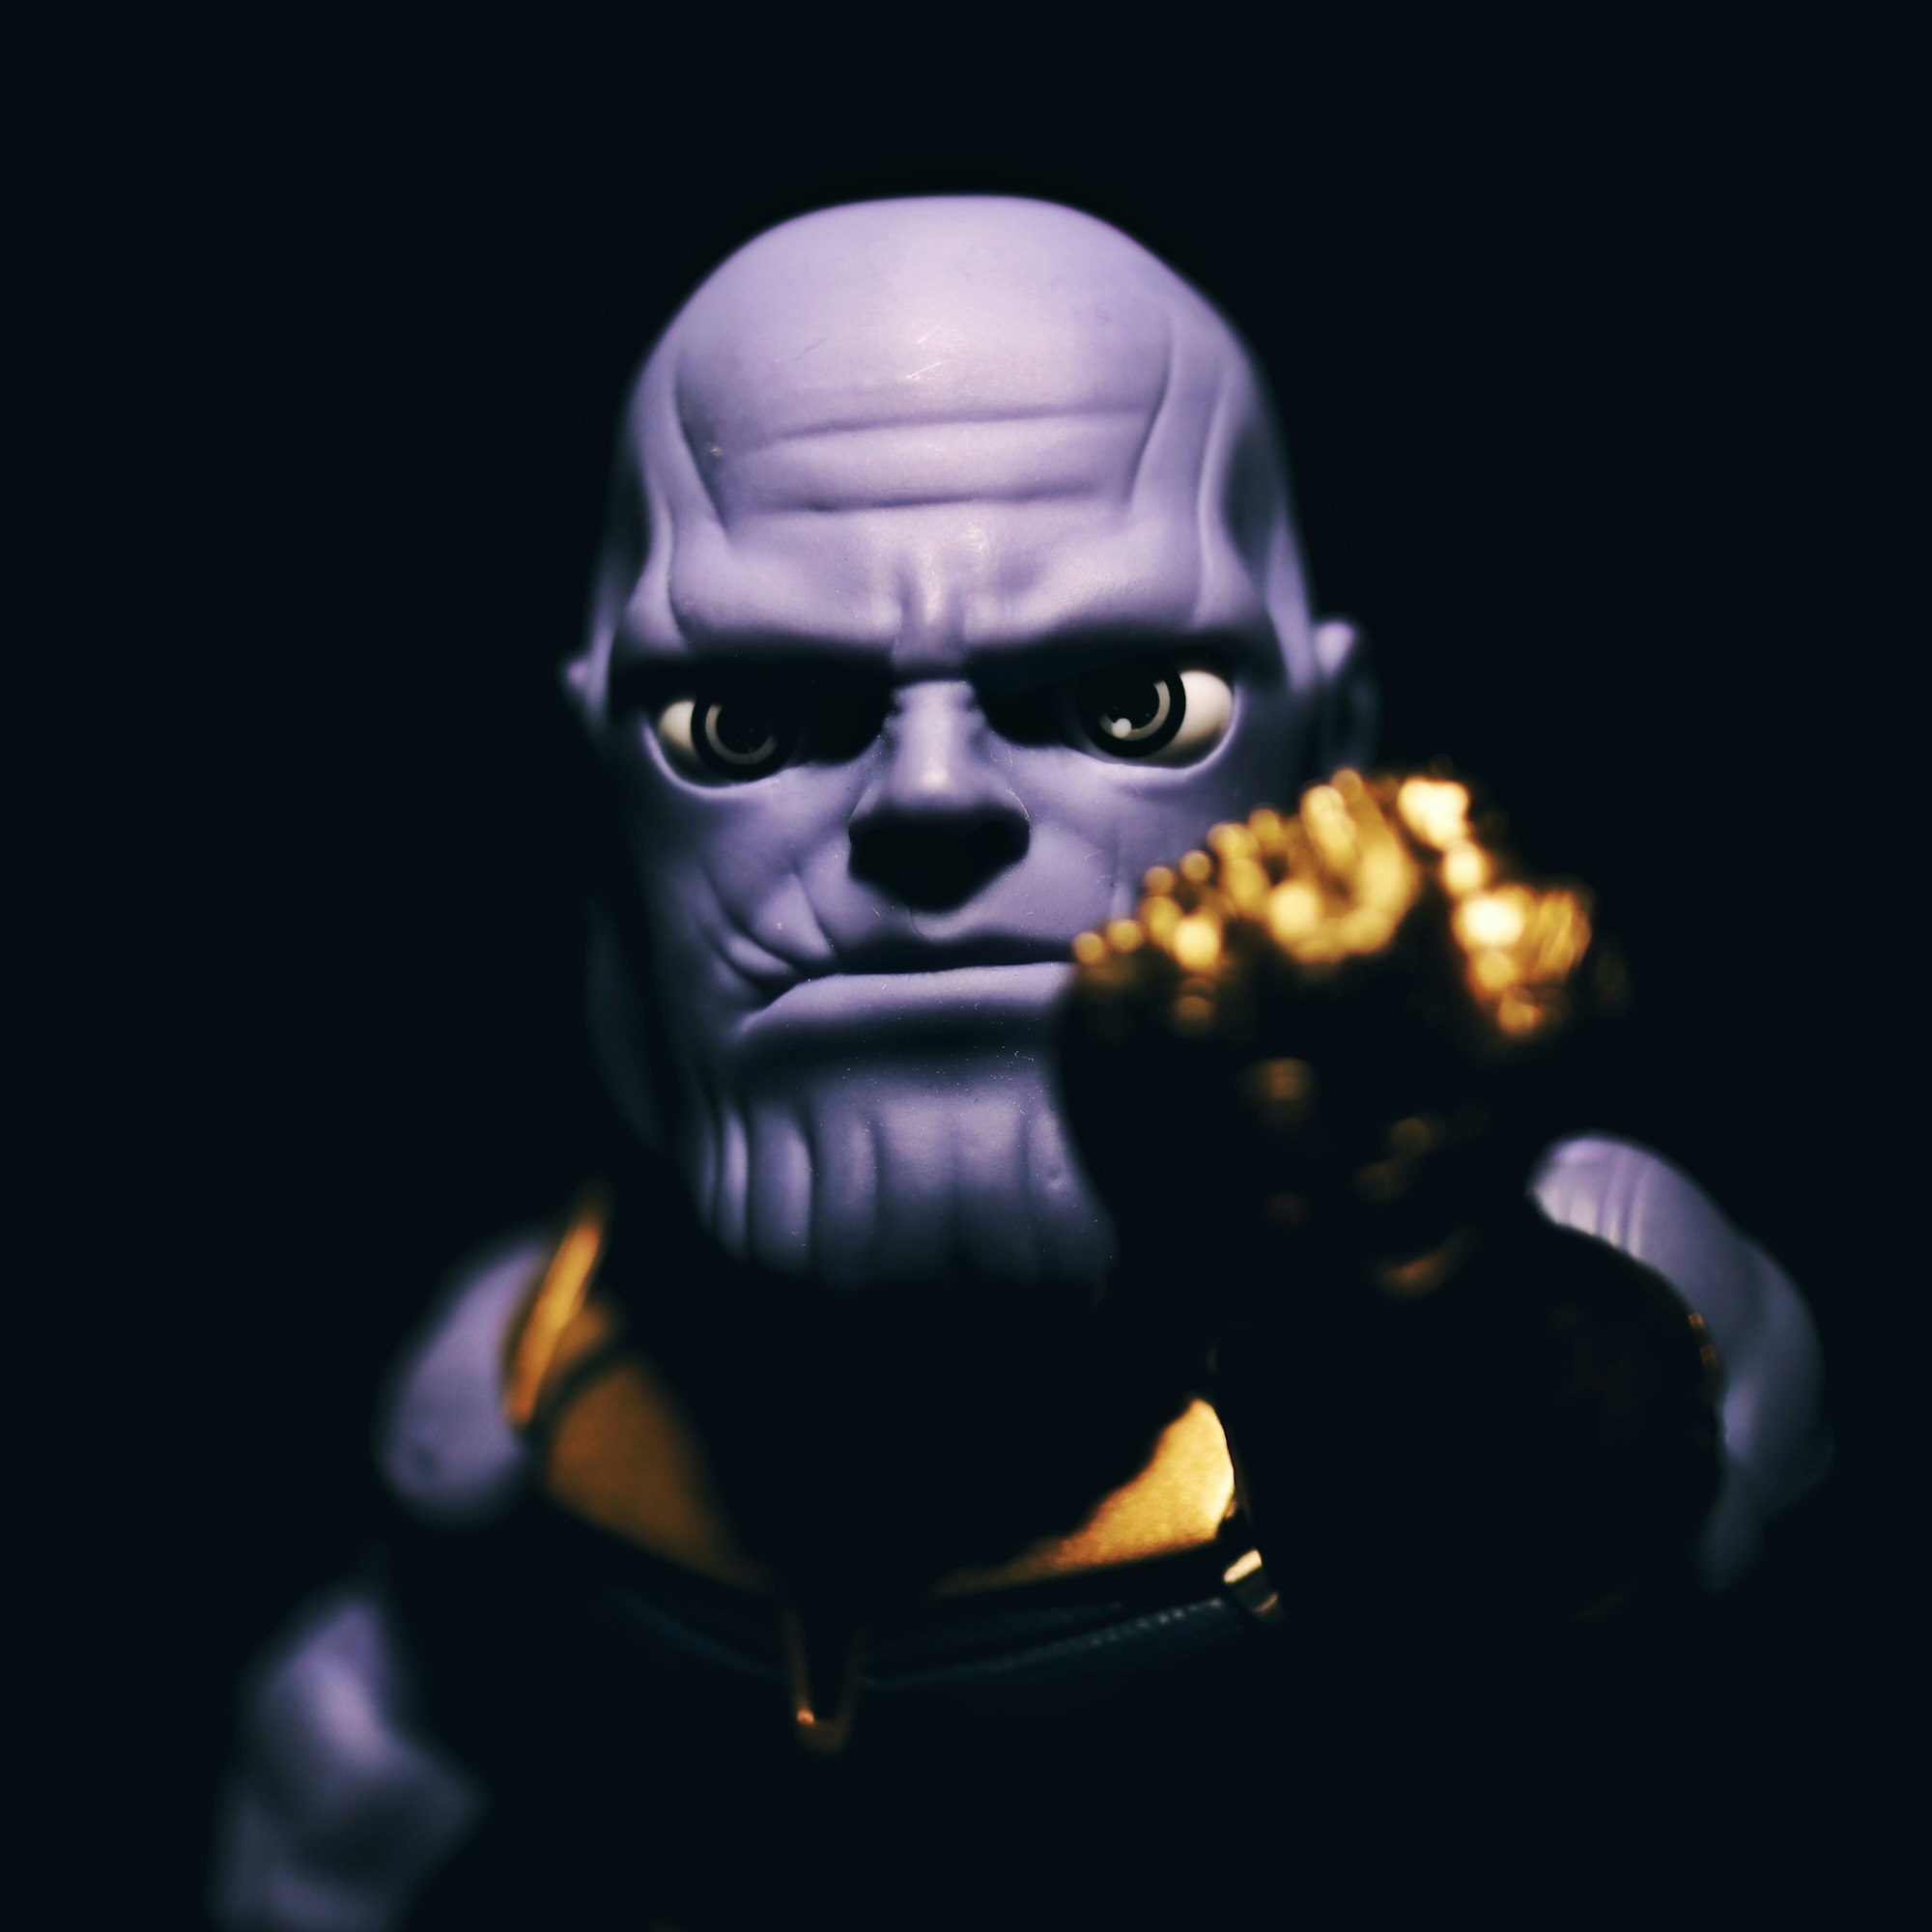 Egg Attack Action Thanos by Beast Kingdom